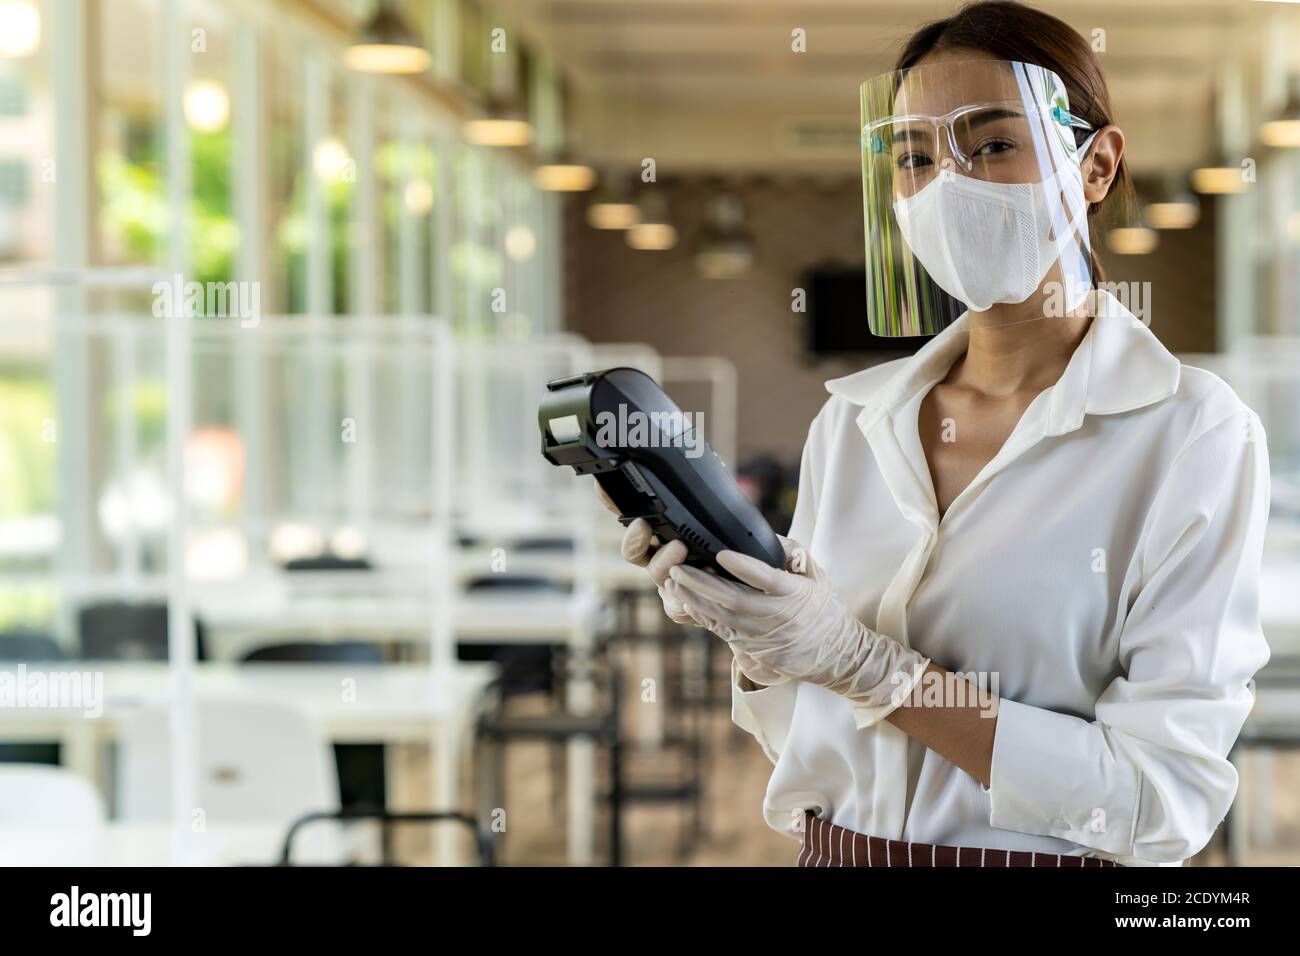 Waitress with face mask hold credit card reader. Stock Photo